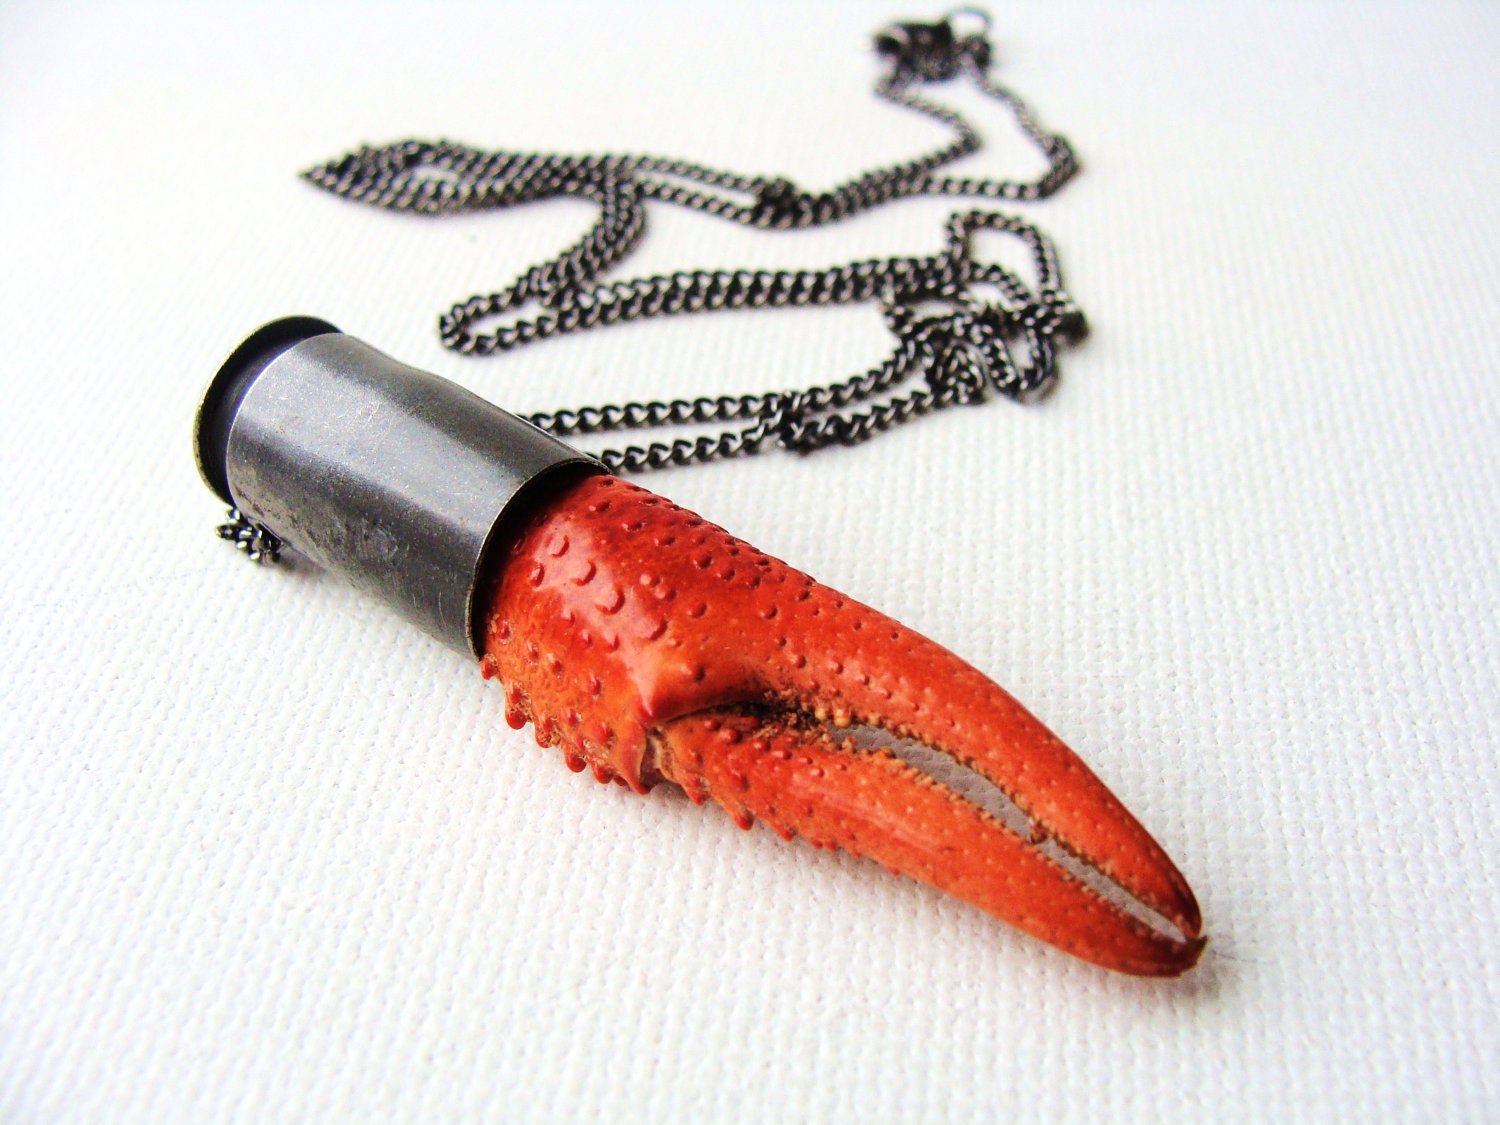 Necklace - Crawfish Claw in Bullet Casing - Scarlet Red -Genuine Materials